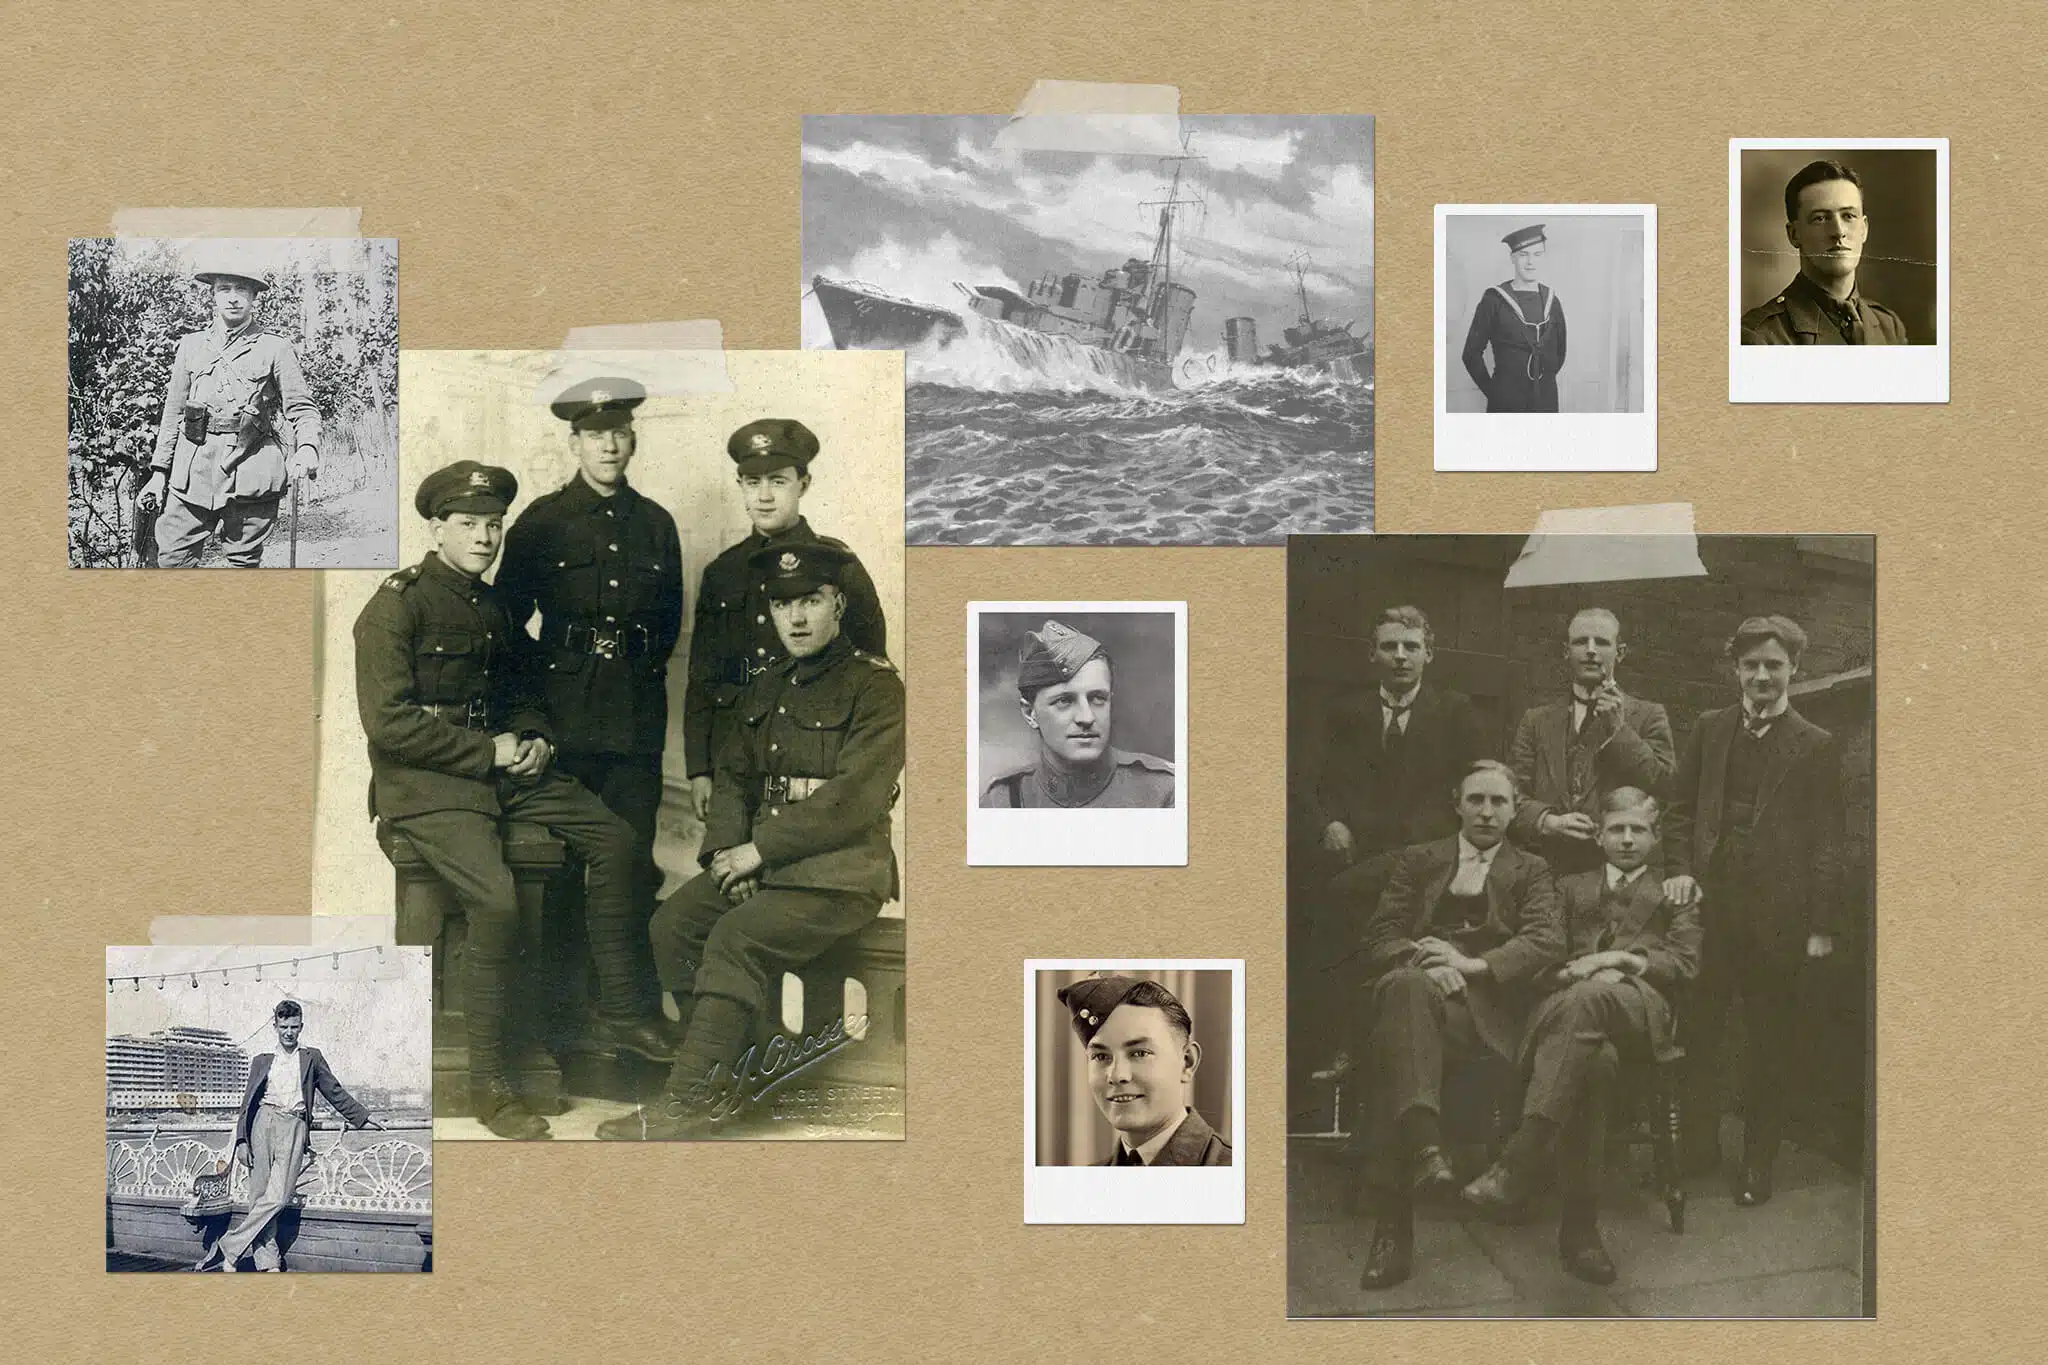 Alumni of St. Bede's who served during the Great War and the Second World War. Their photographs are displayed on a board.